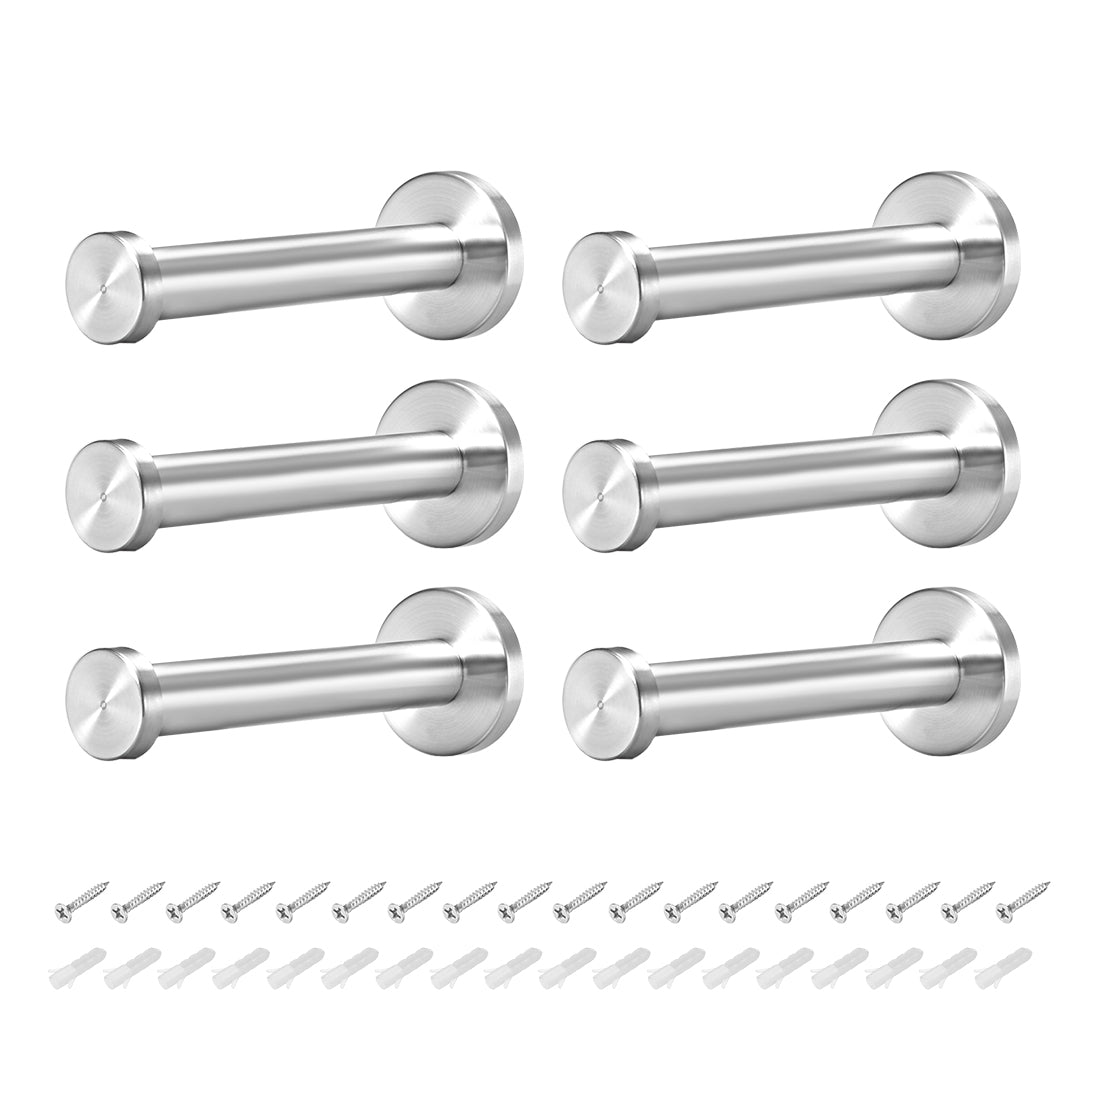 uxcell Uxcell 6Pcs Wall Mounted Hook Robe Hooks Single Towel Hanger With Screws, Stainless Steel, (2.63Inch, Silver)